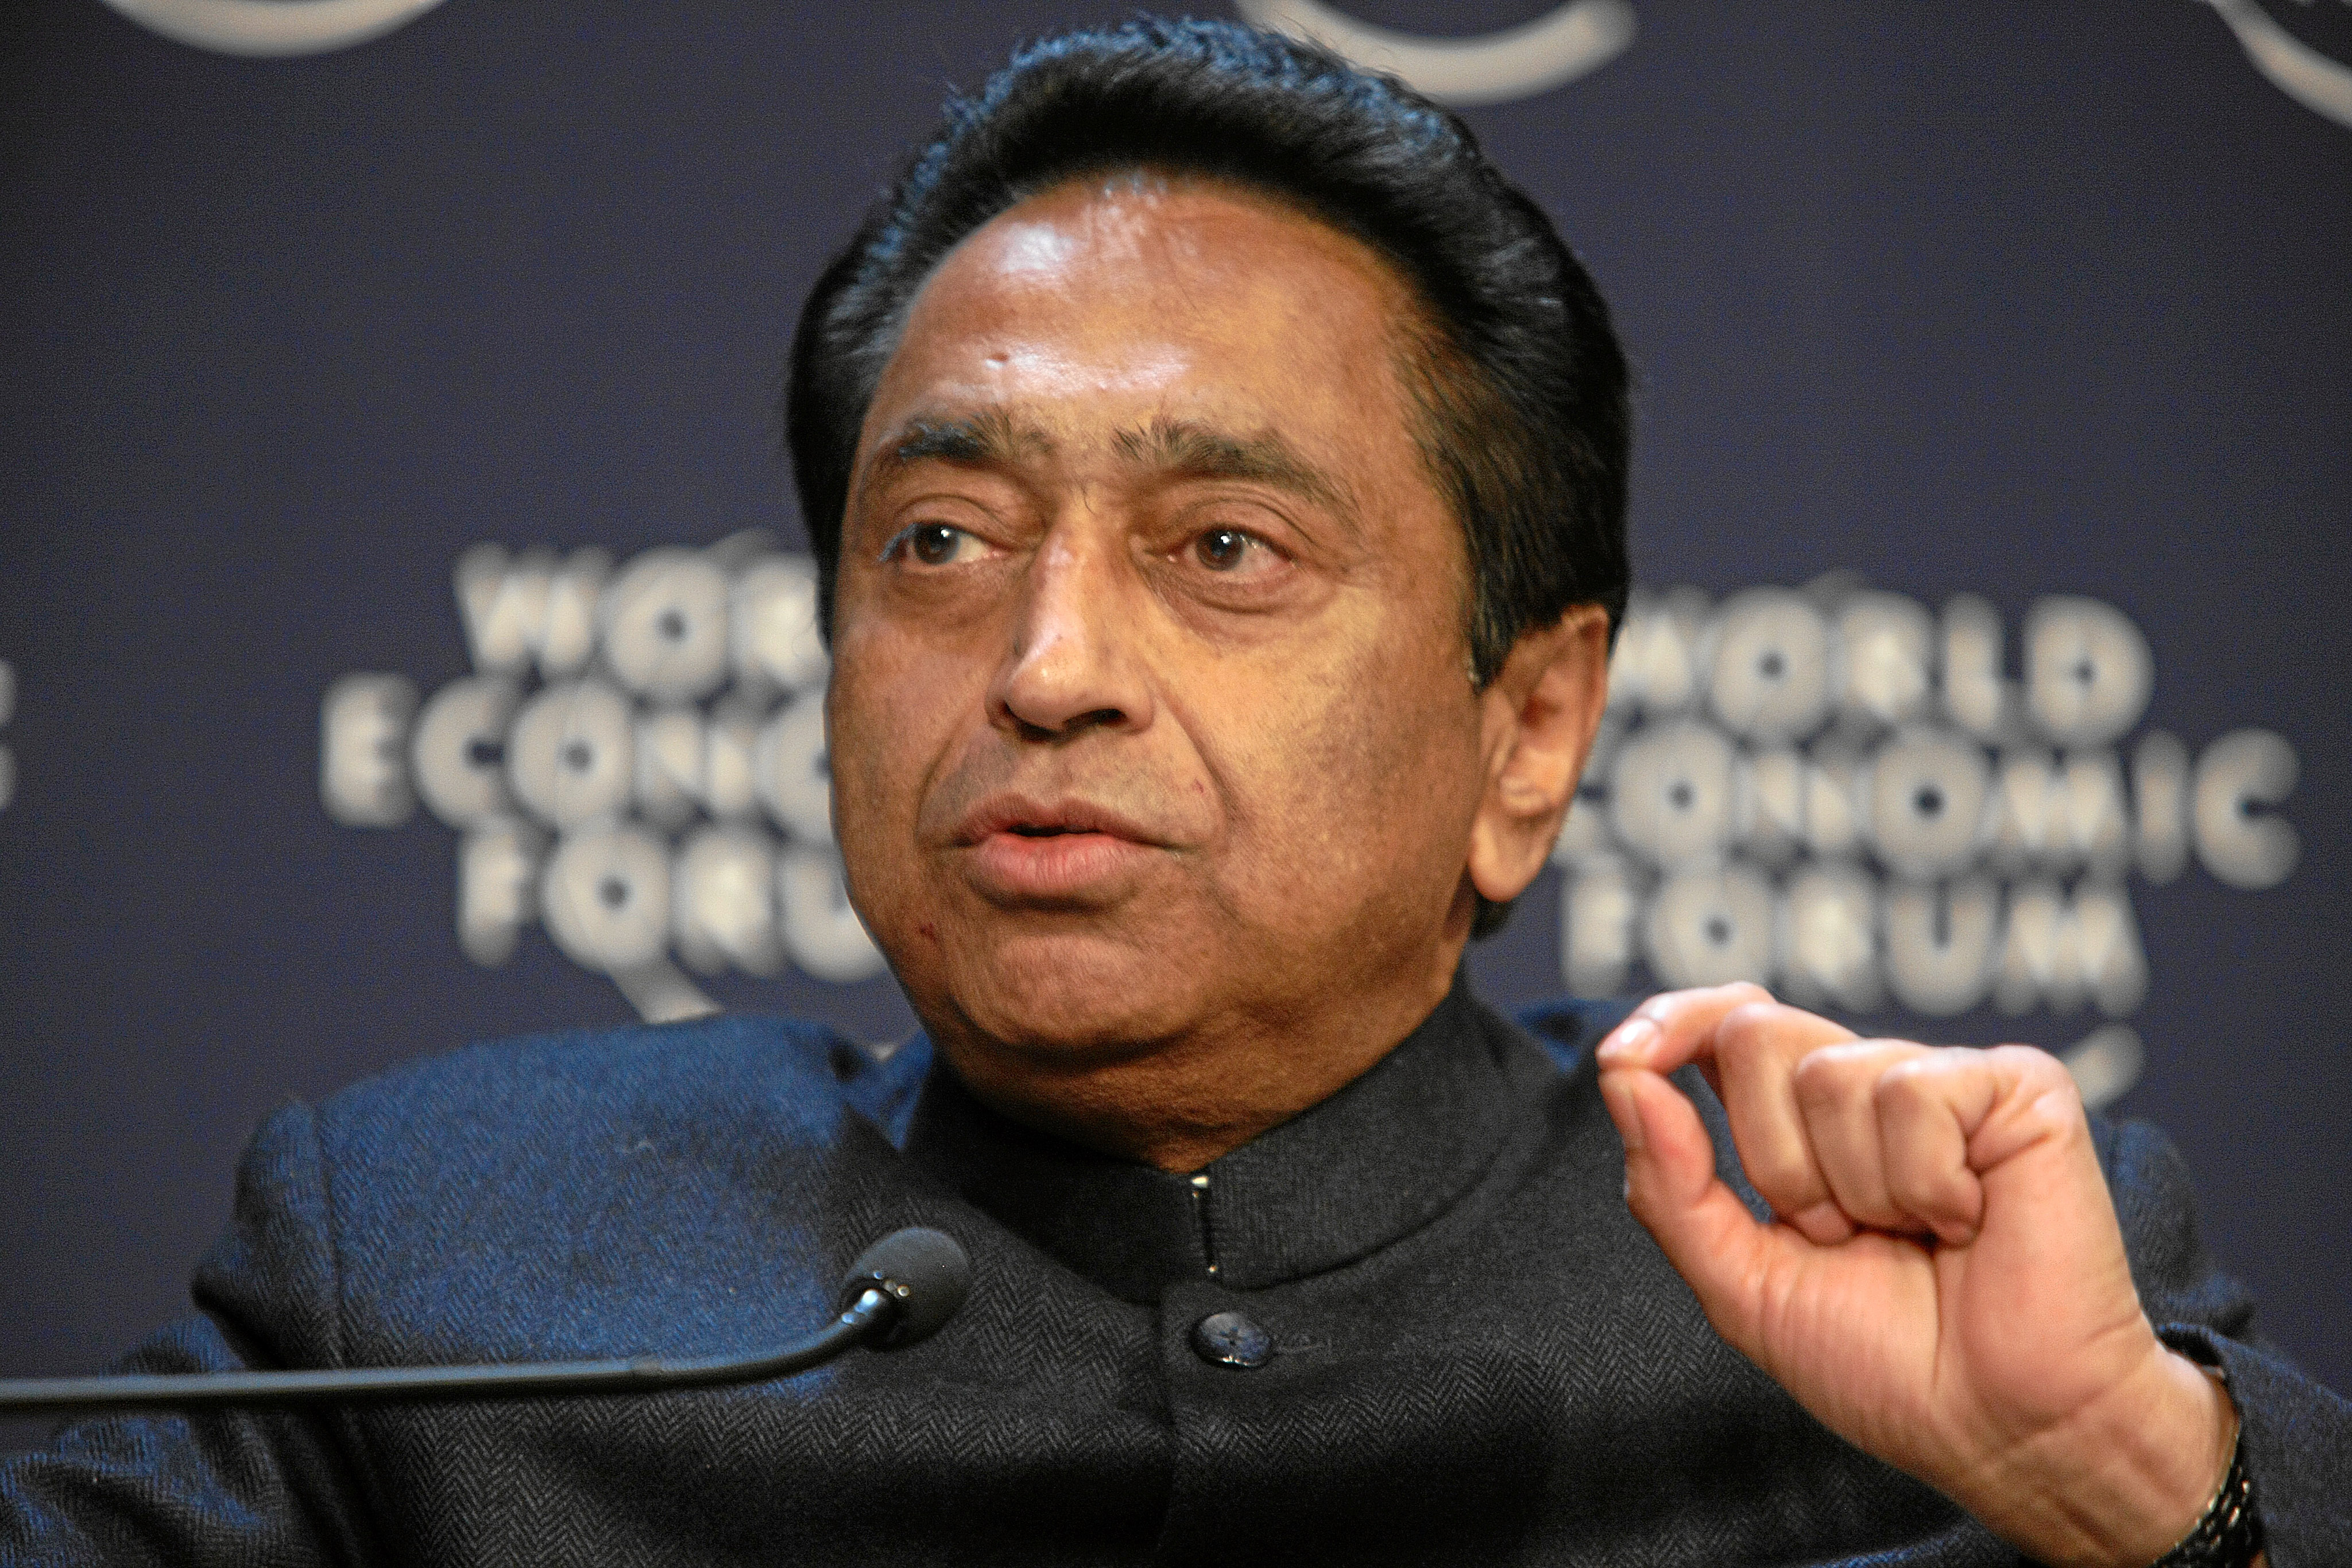 Reinvestigate the role of Kamal Nath in 1984-anti Sikh riots: Sirsa